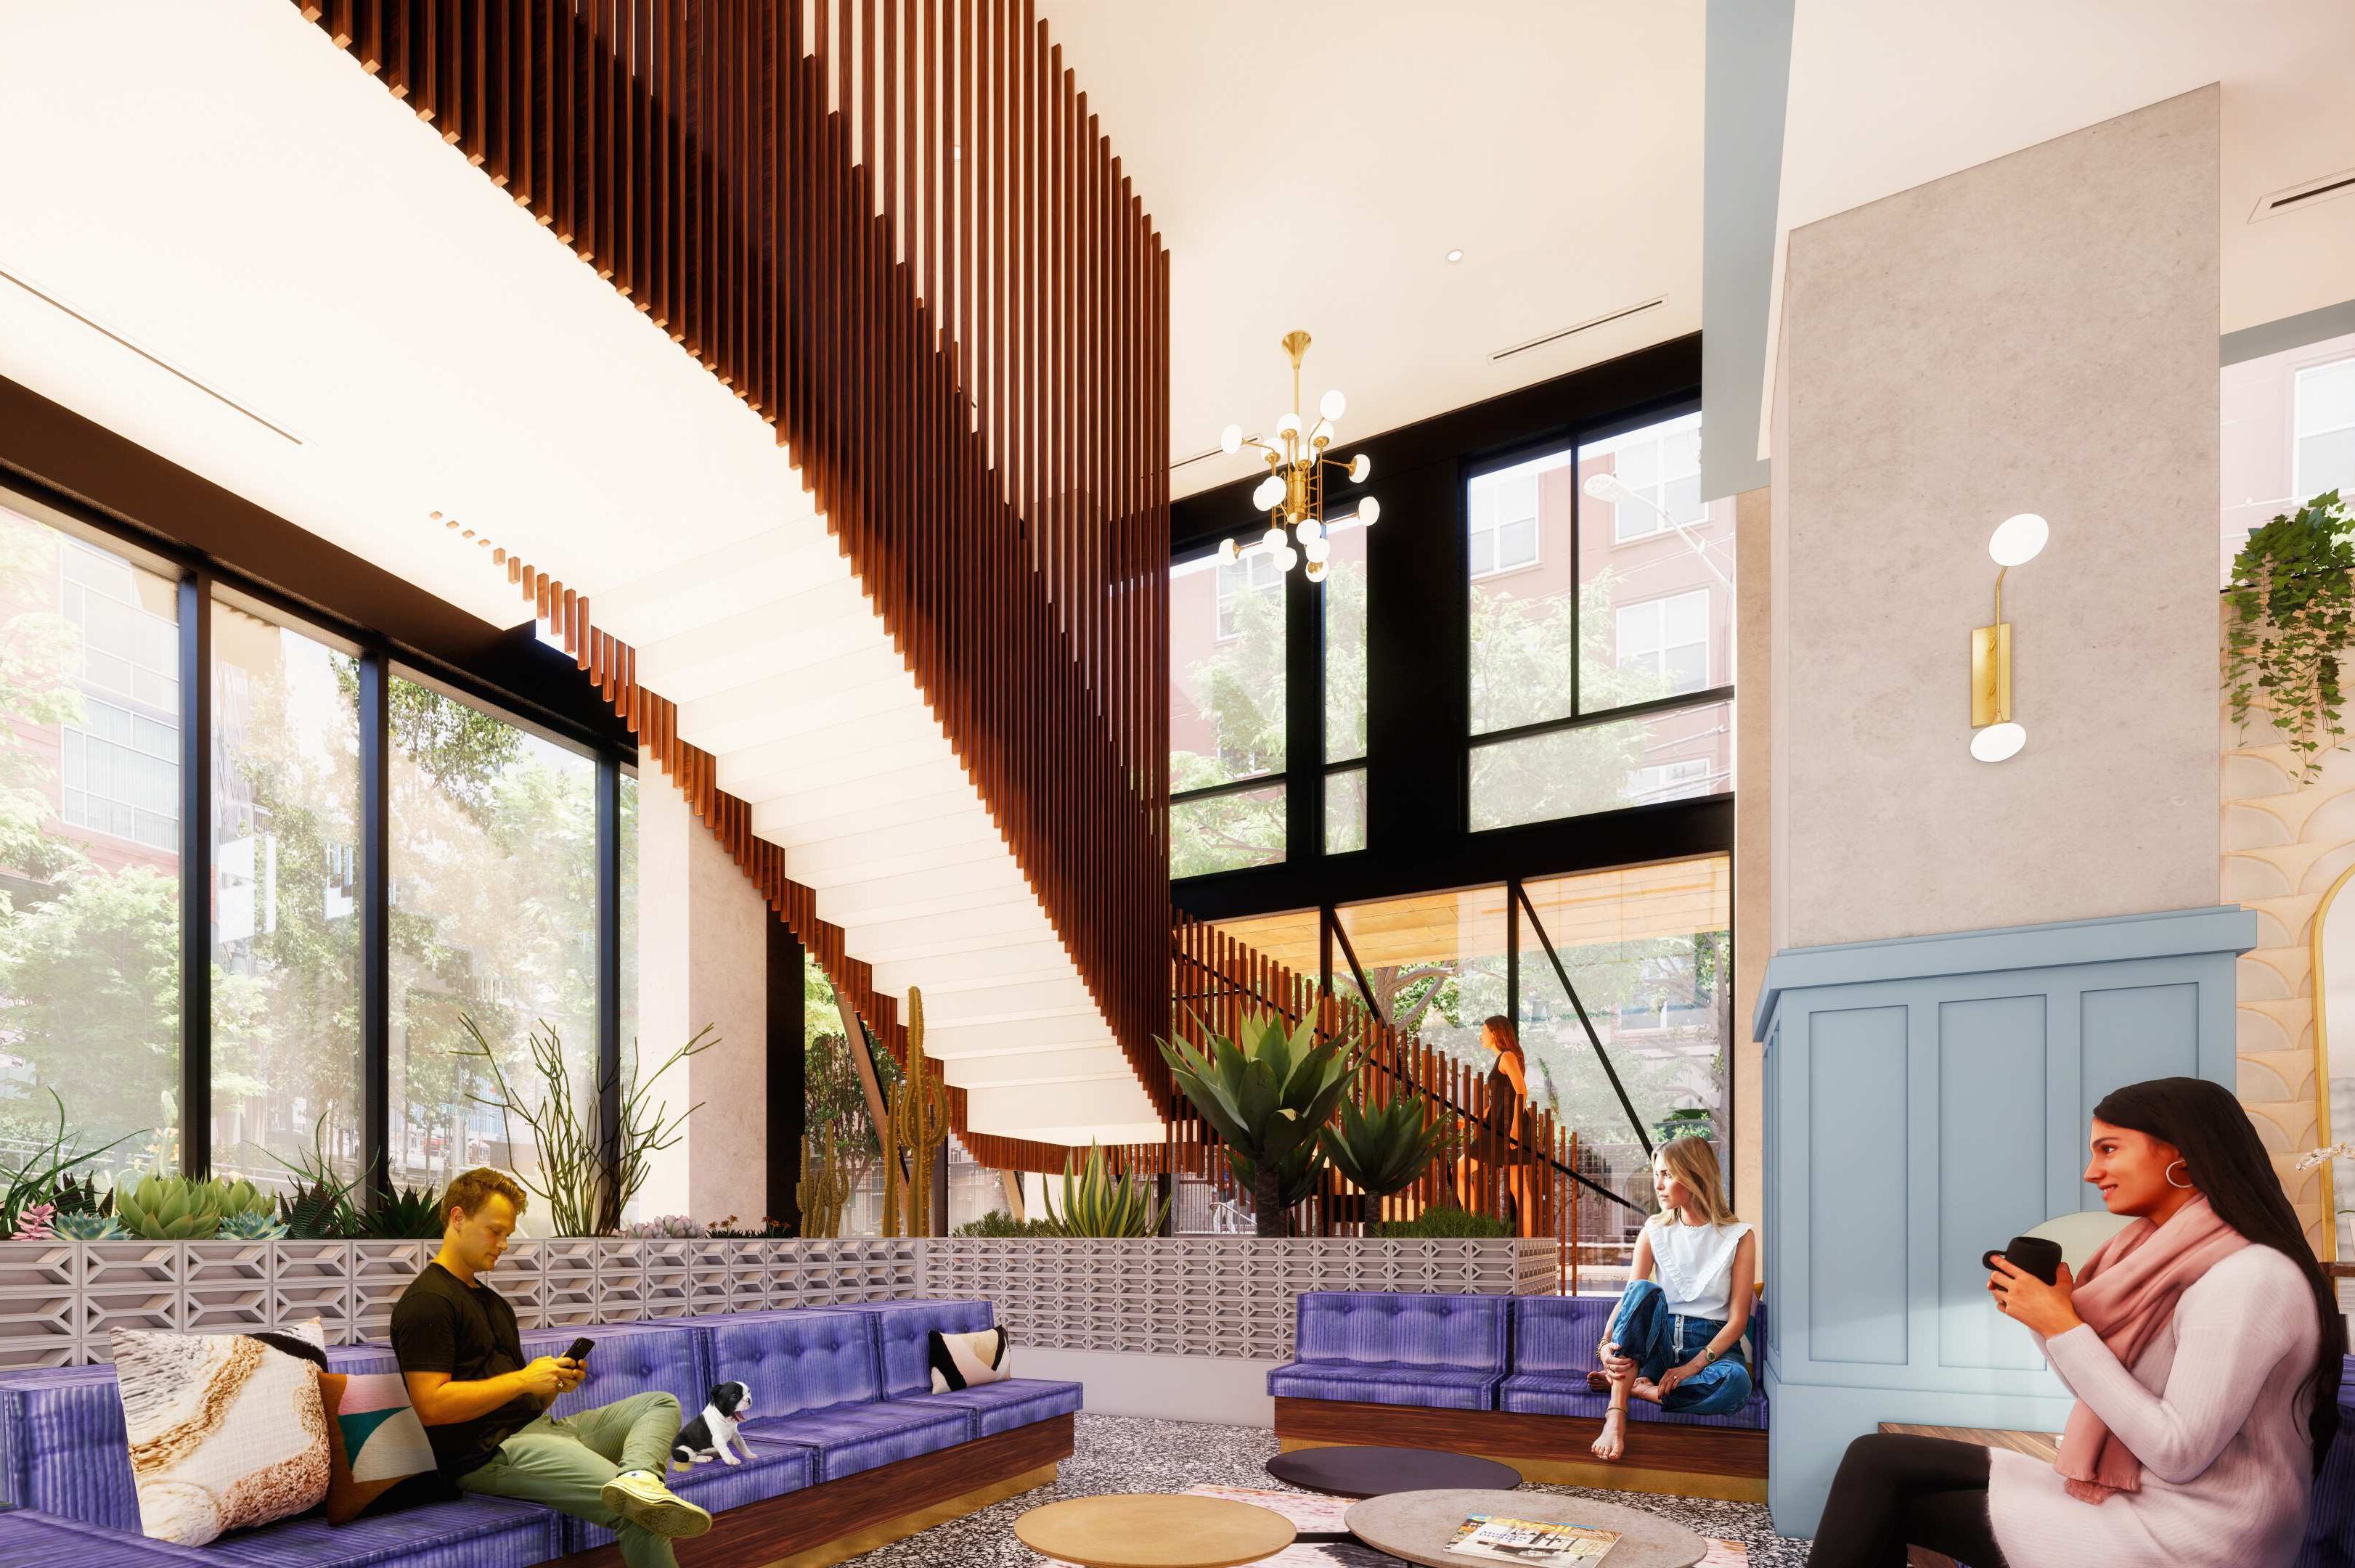 rendering of conversation pit at Waterloo Tower, student housing apartment in West Campus near UT Austin.